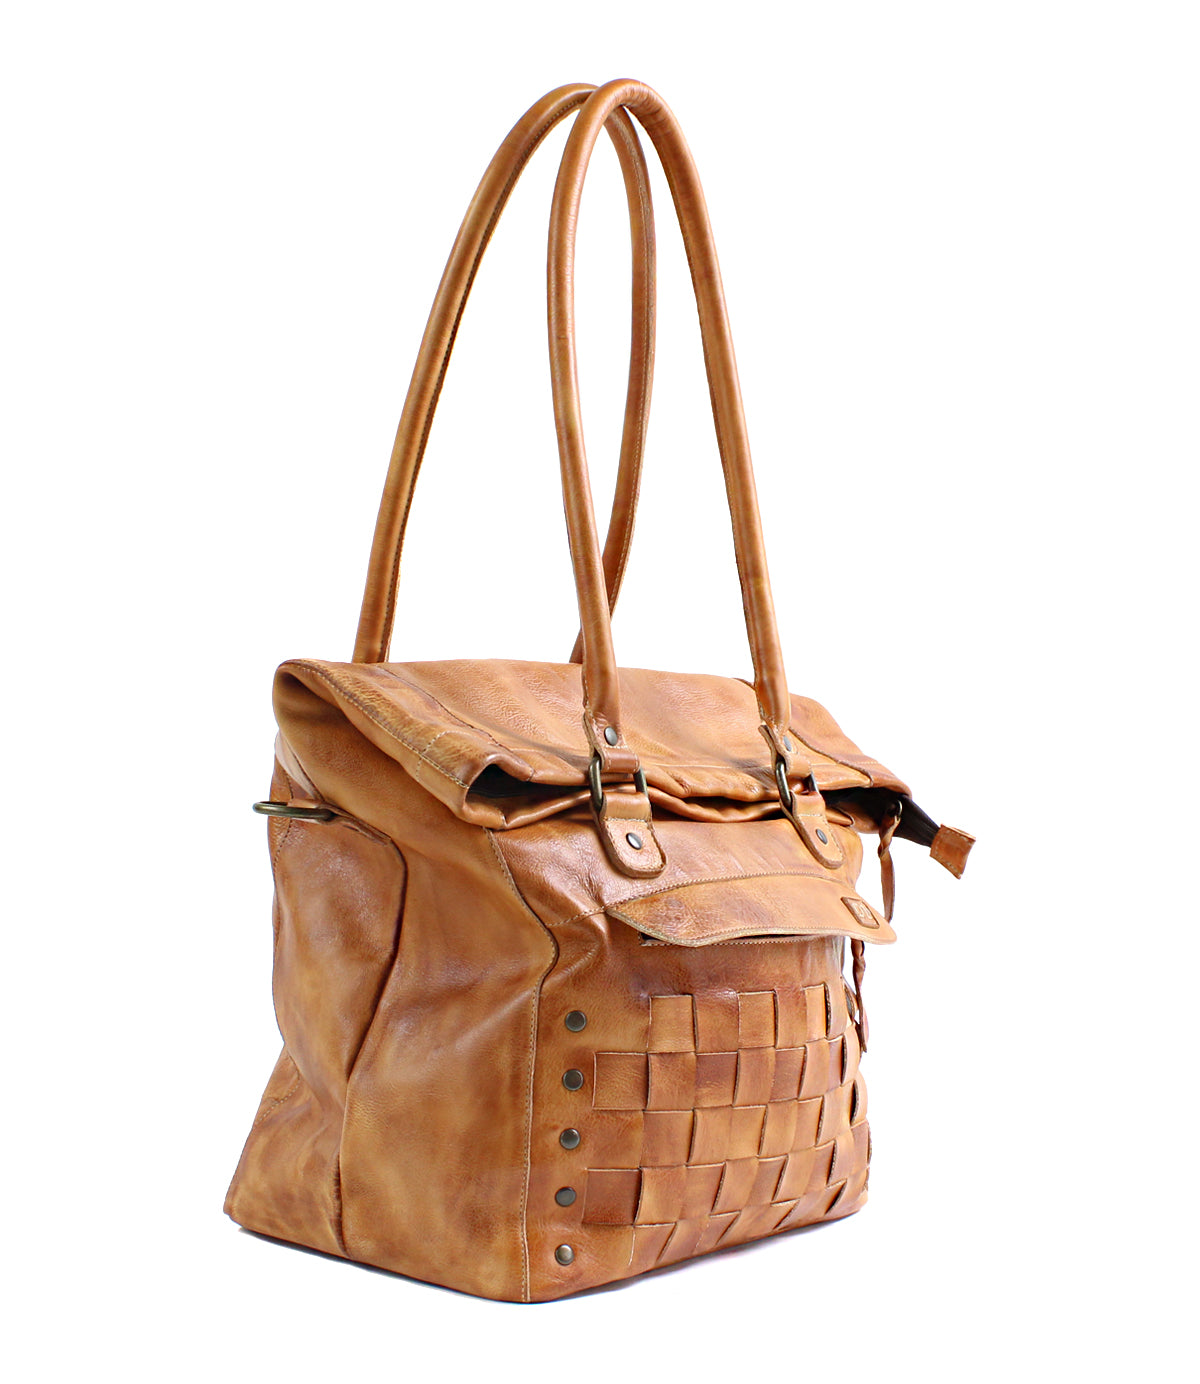 A Miriam handbag by Bed Stu, made of pecan leather with handles.